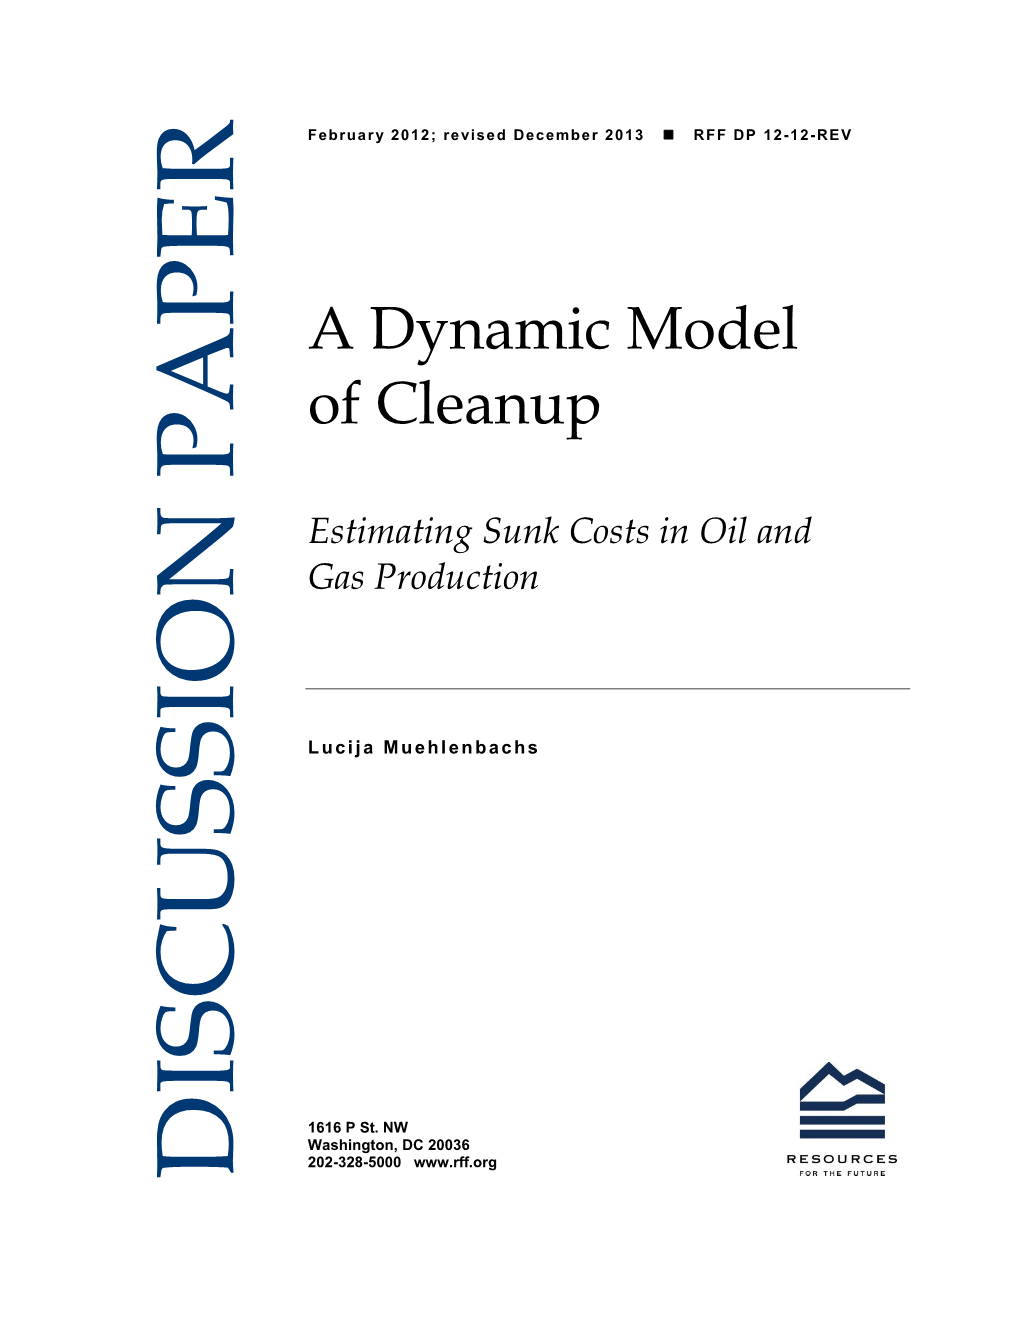 A Dynamic Model of Cleanup: Estimating Sunk Costs in Oil And